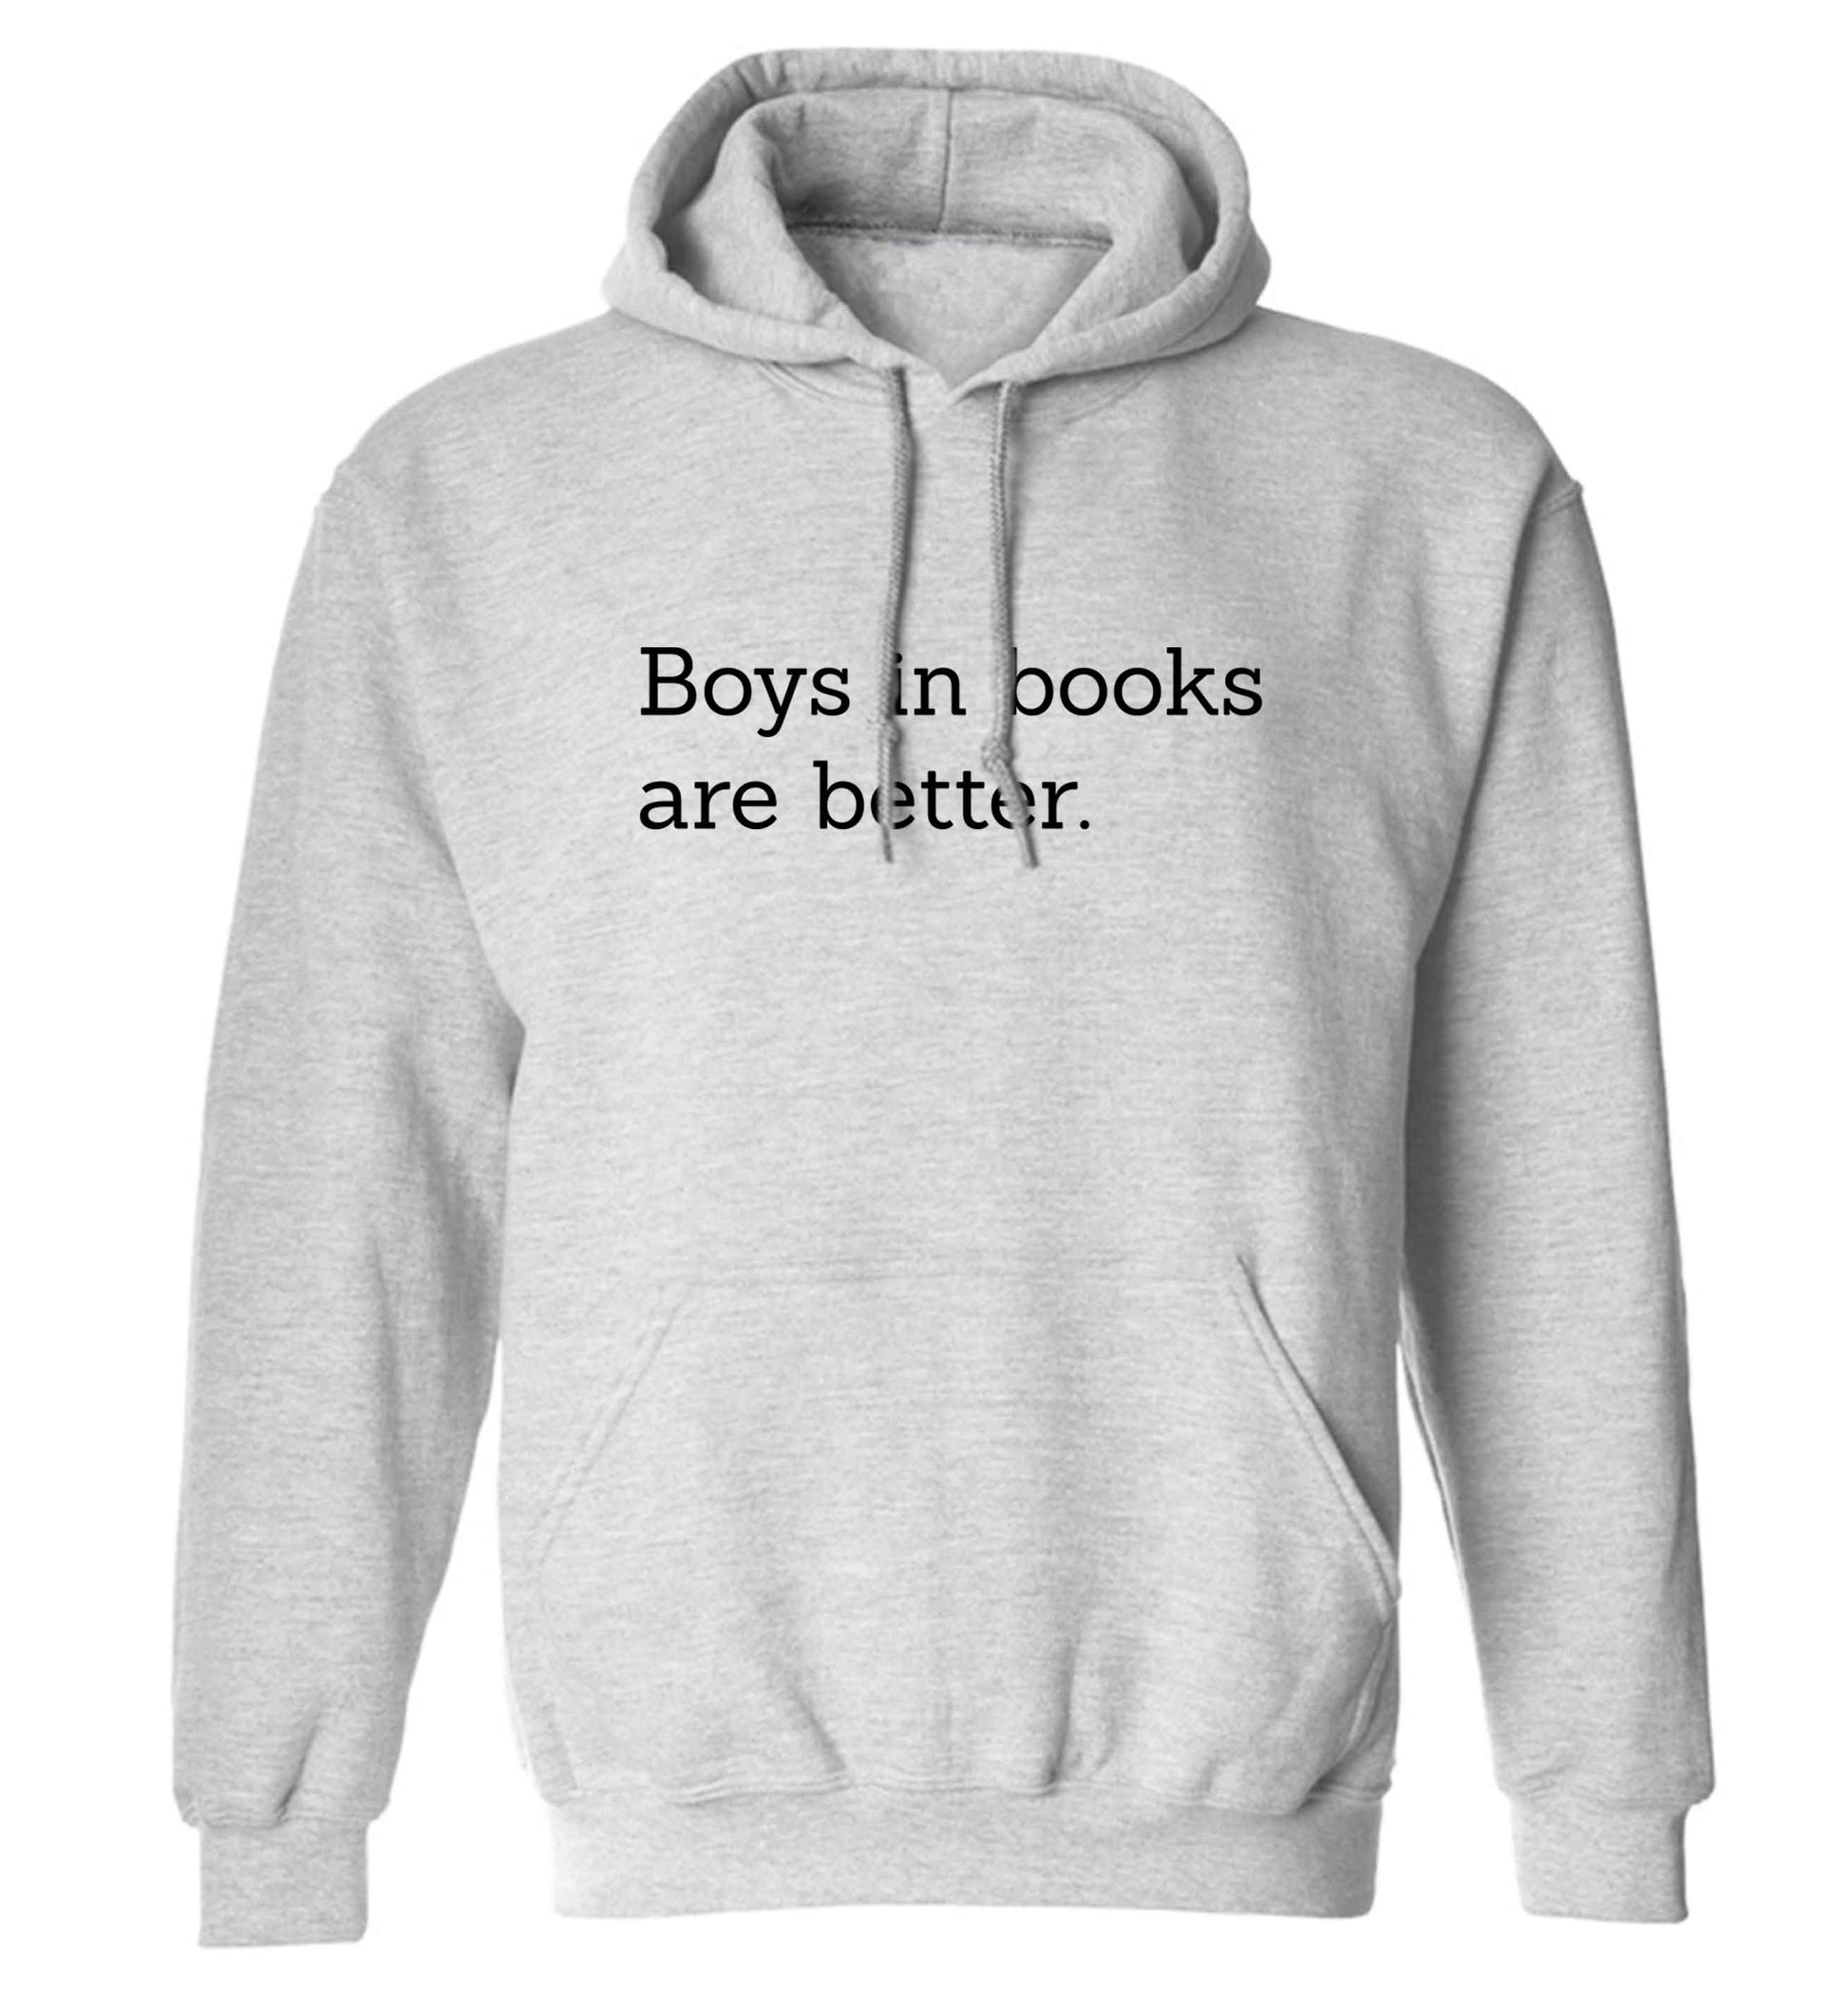 Boys in books are better adults unisex grey hoodie 2XL